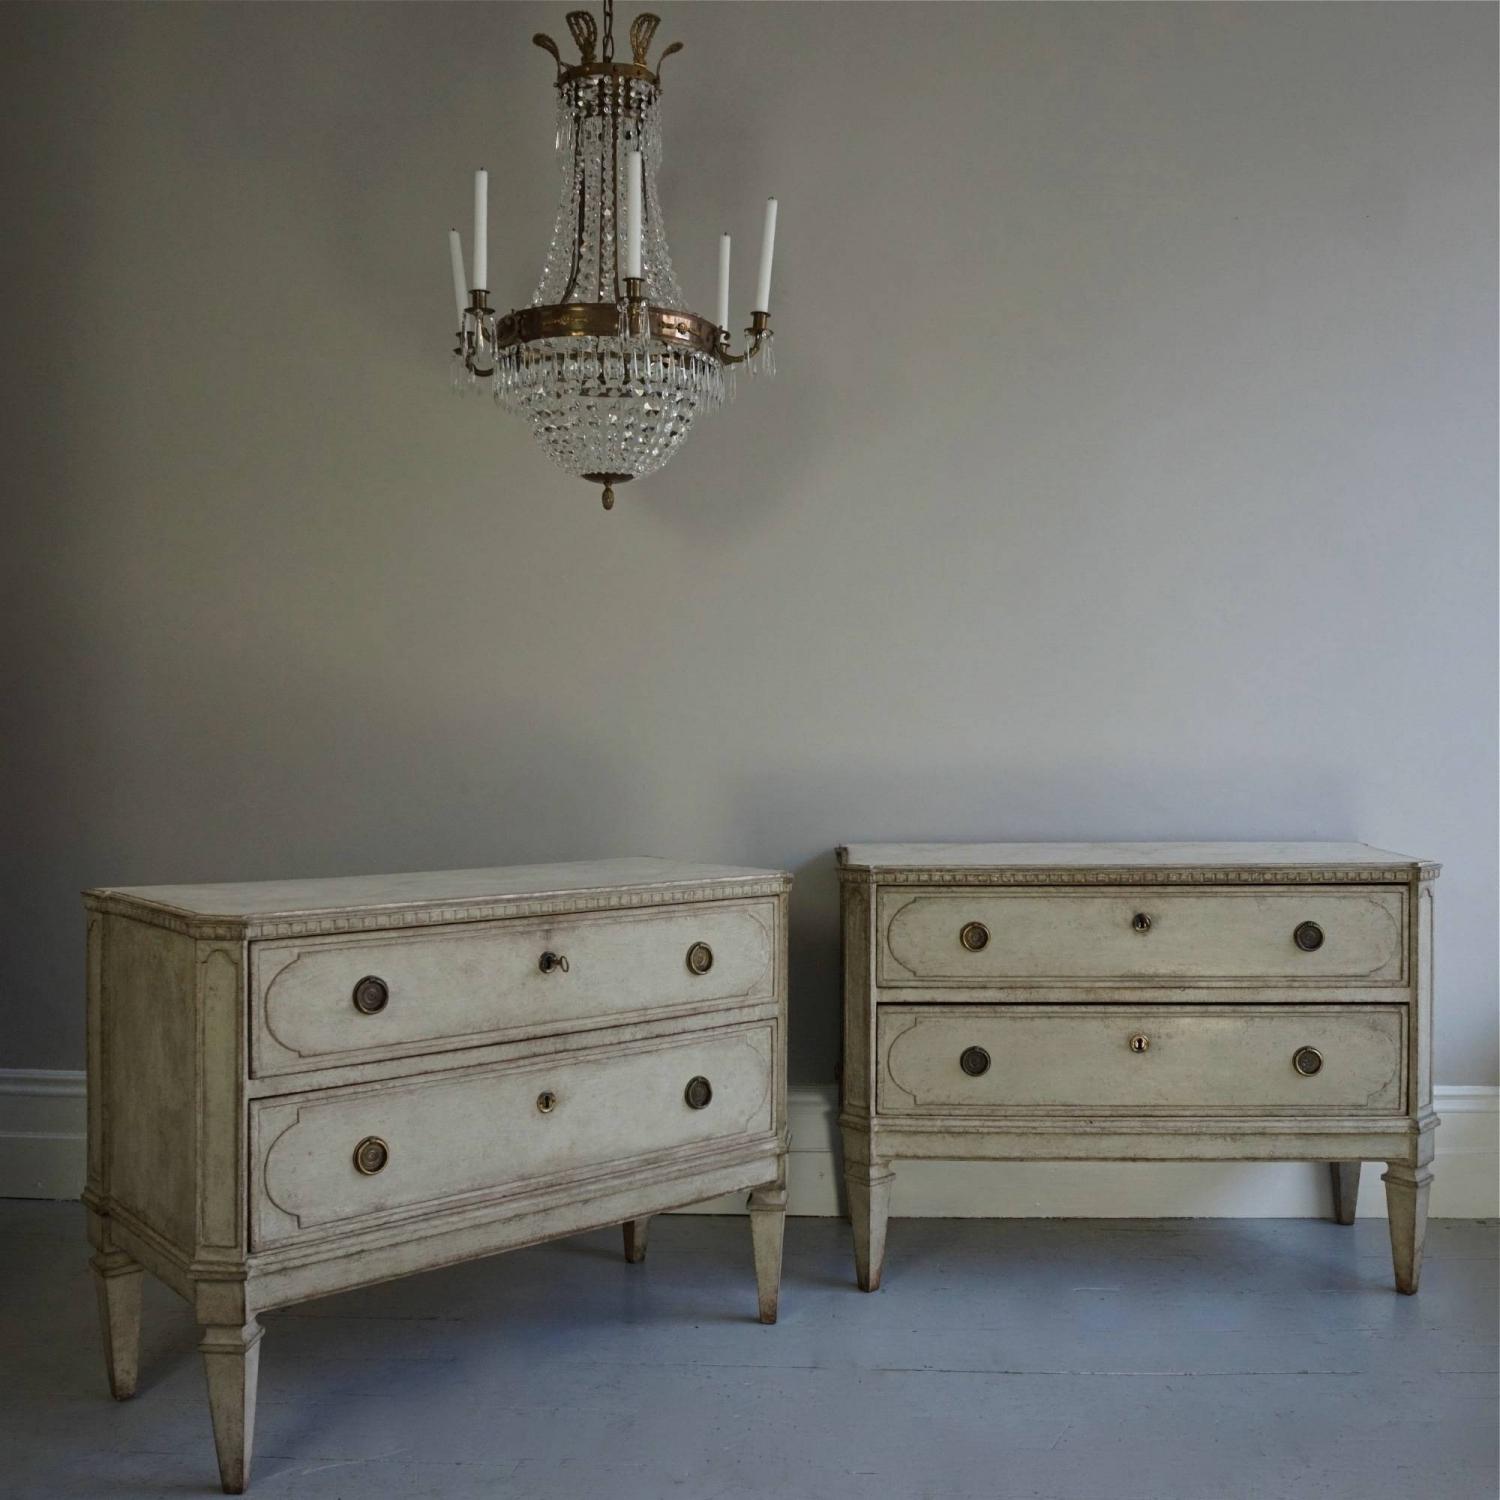 VERY FINE PAIR OF SWEDISH GUSTAVIAN STYLE CHESTS